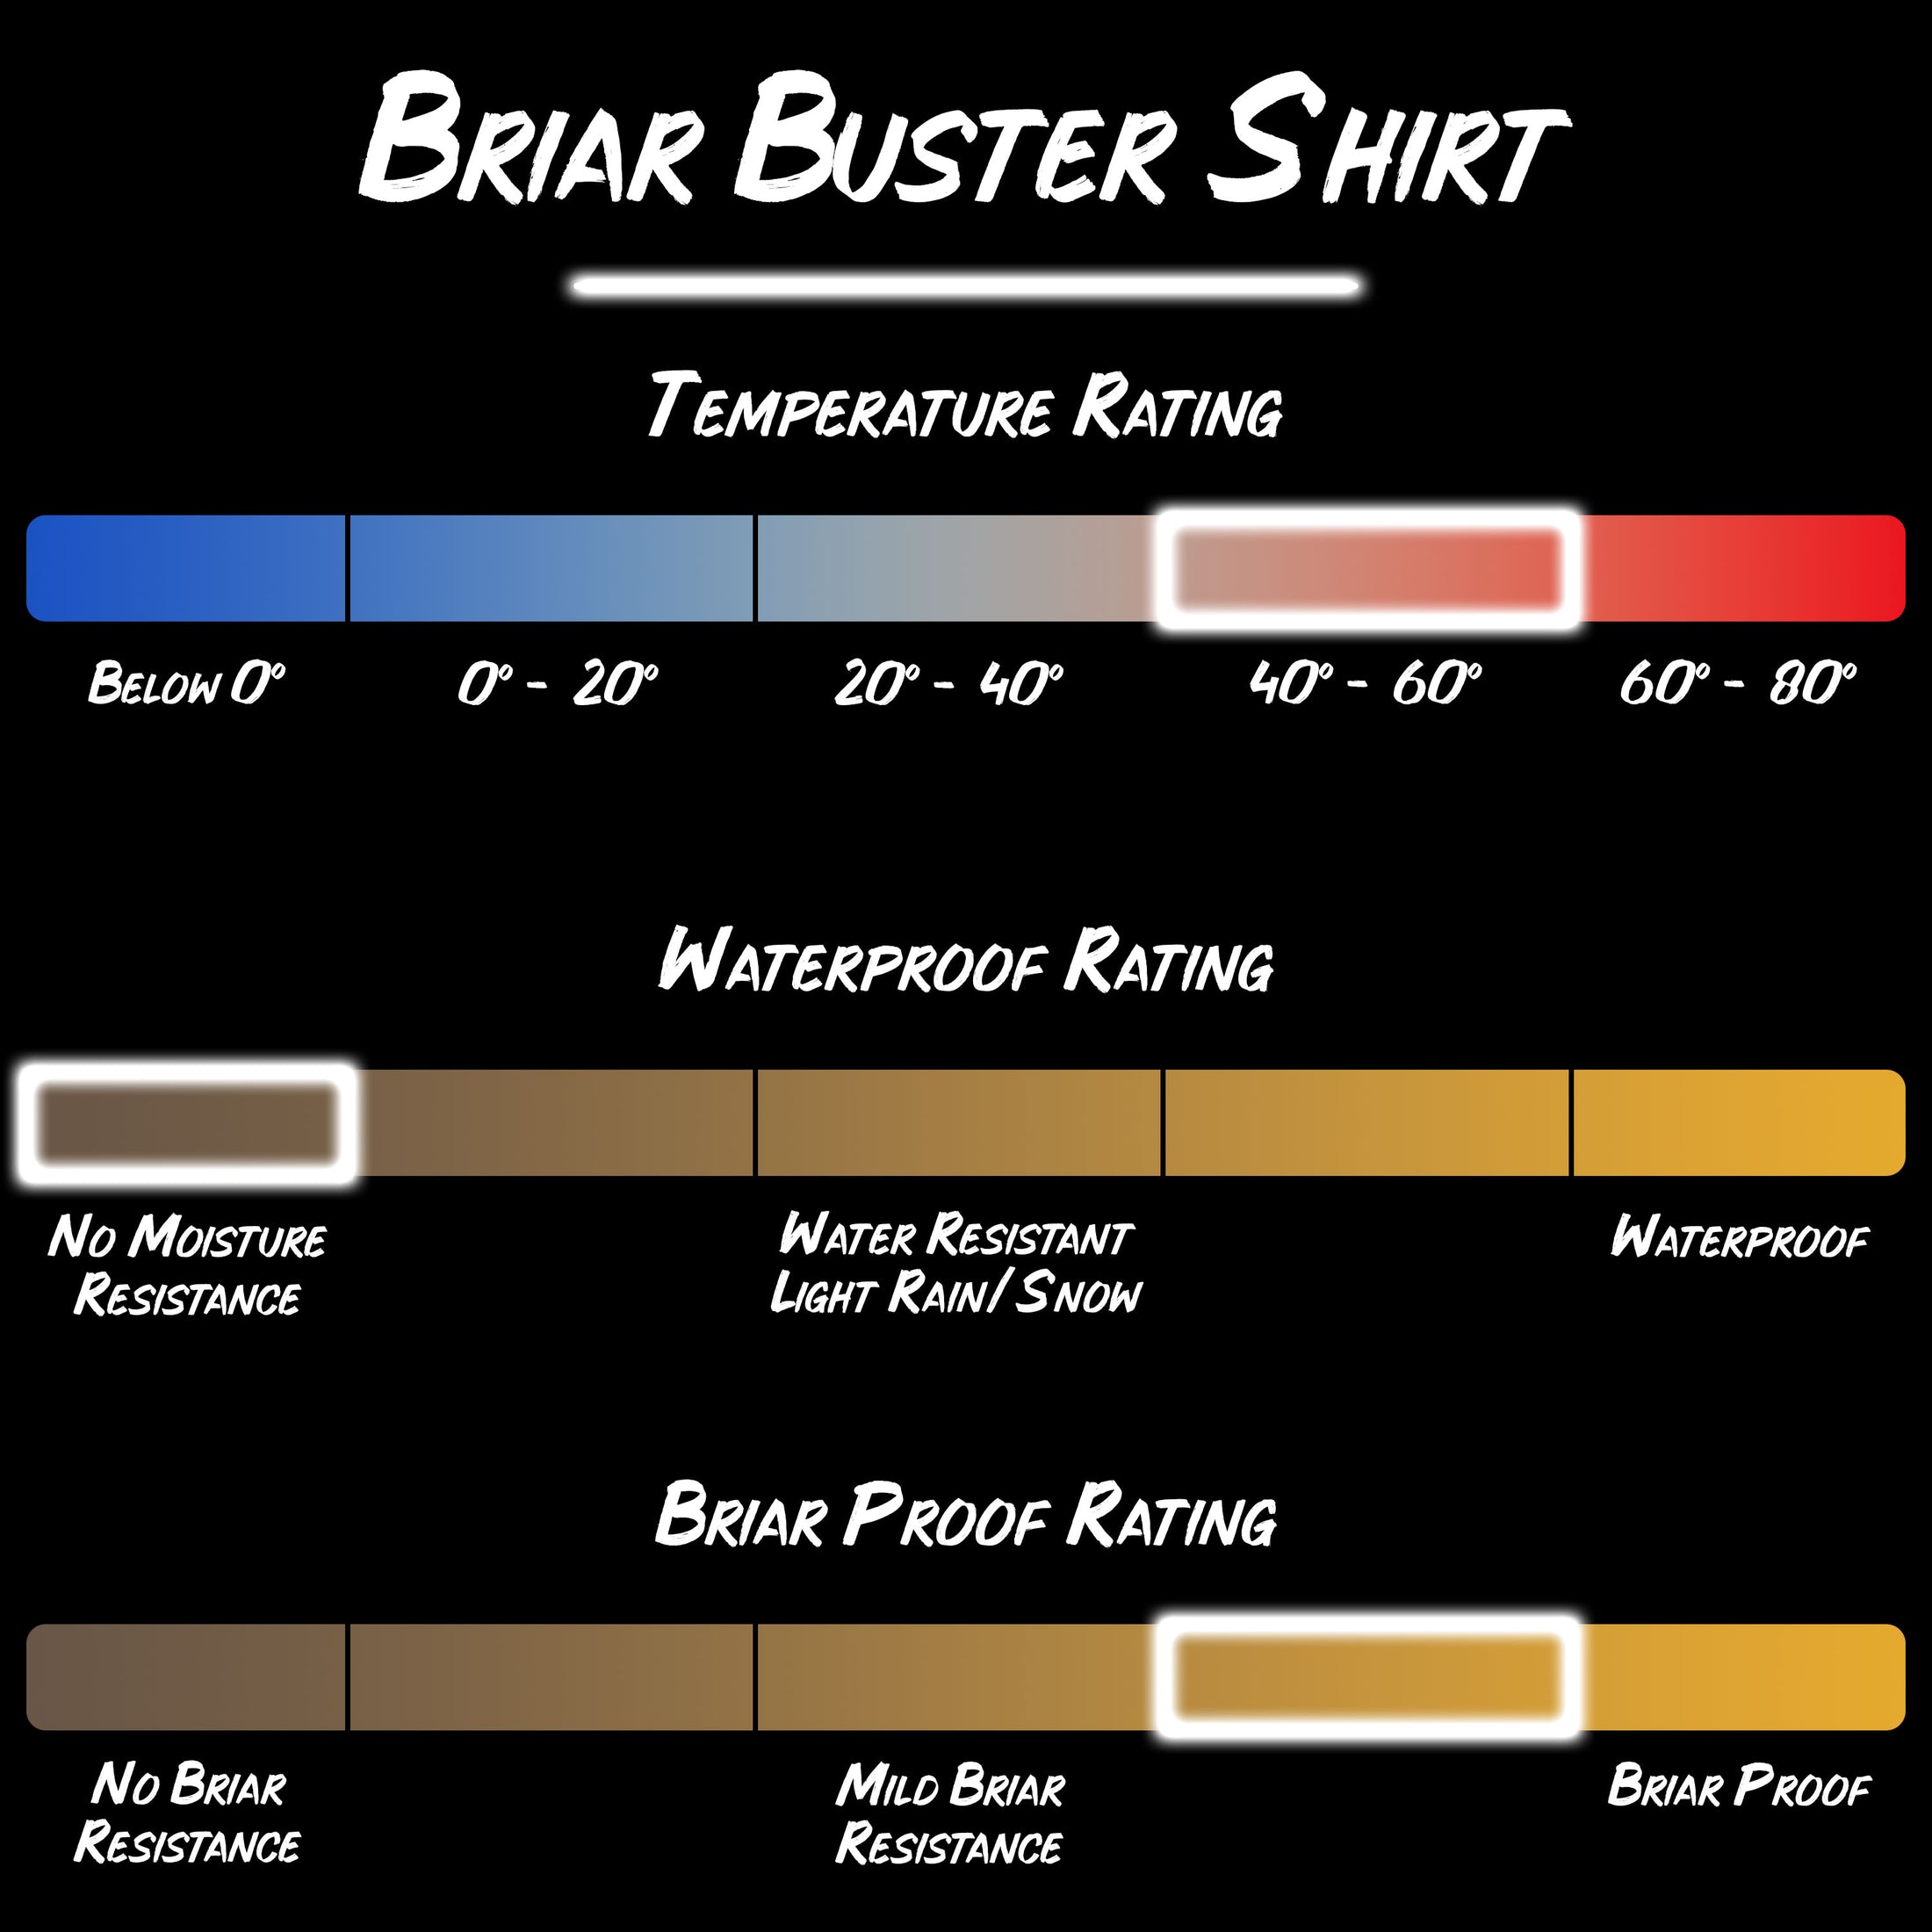 Briar Buster Long Sleeve Shirt product specifications